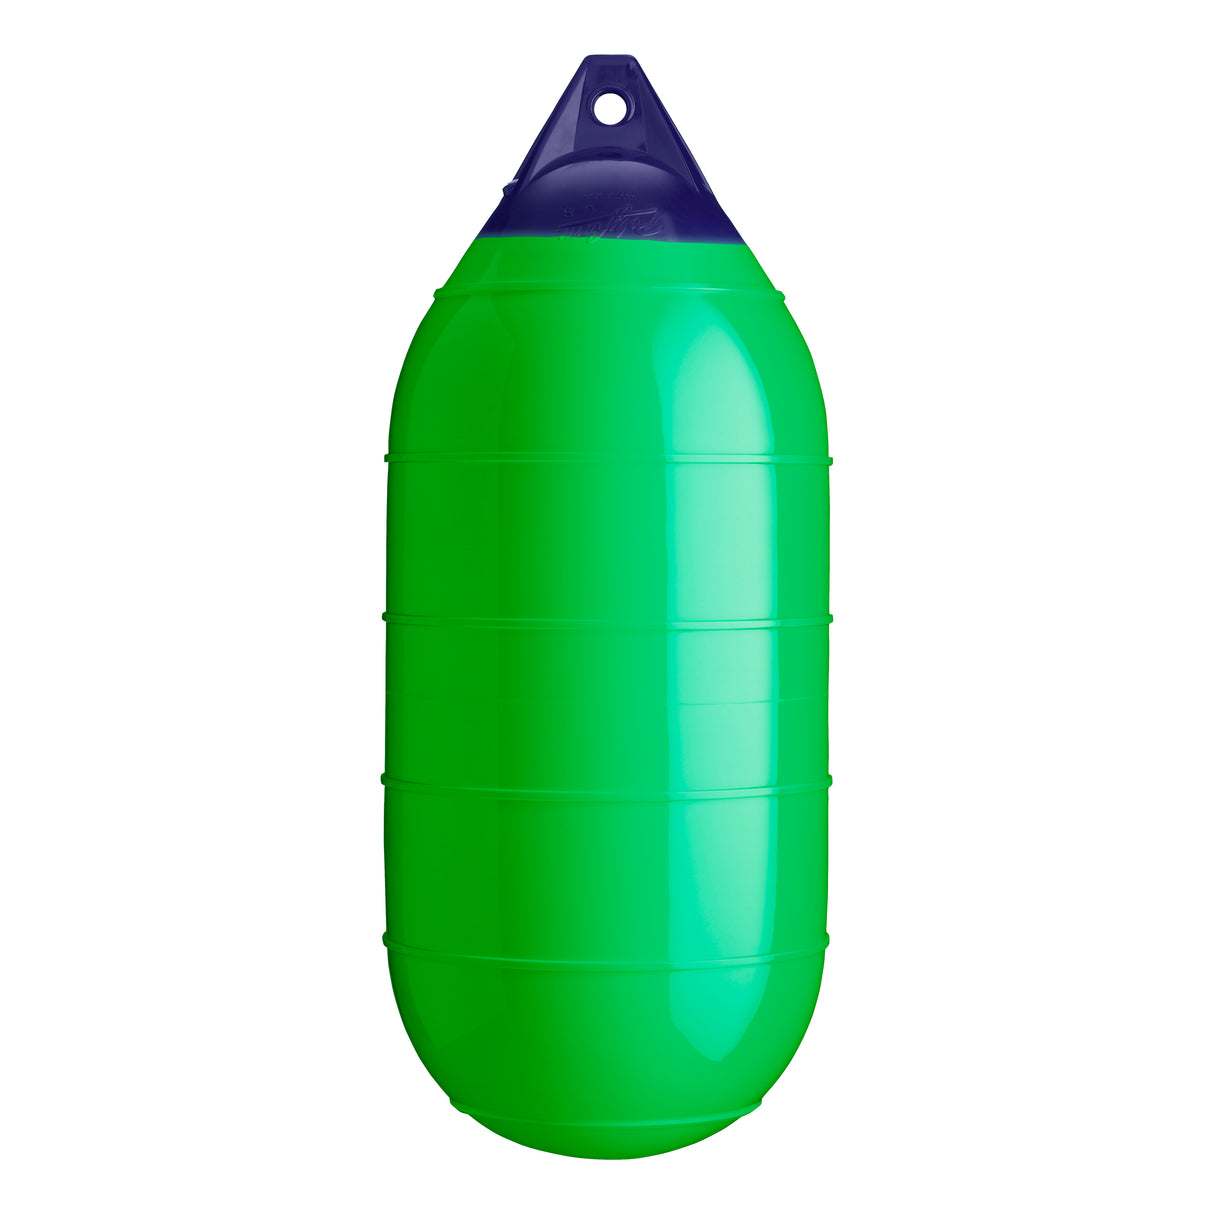 Green inflatable low drag buoy, Polyform LD-4 